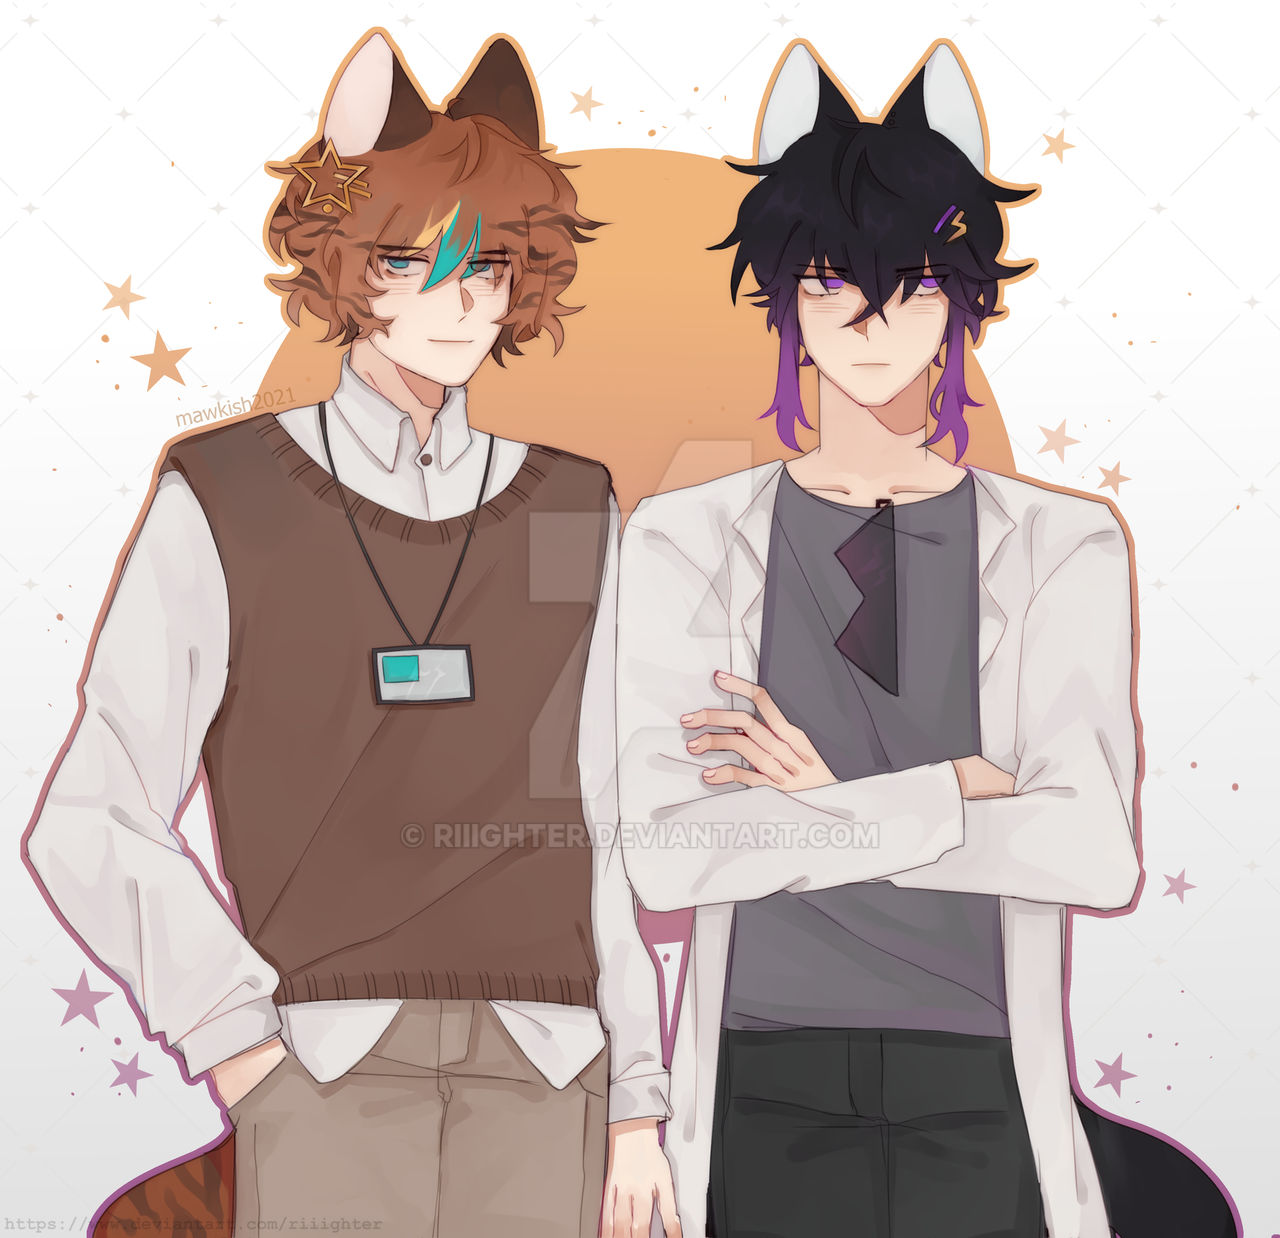 two handsome boys standing together | OC by riiighter on DeviantArt